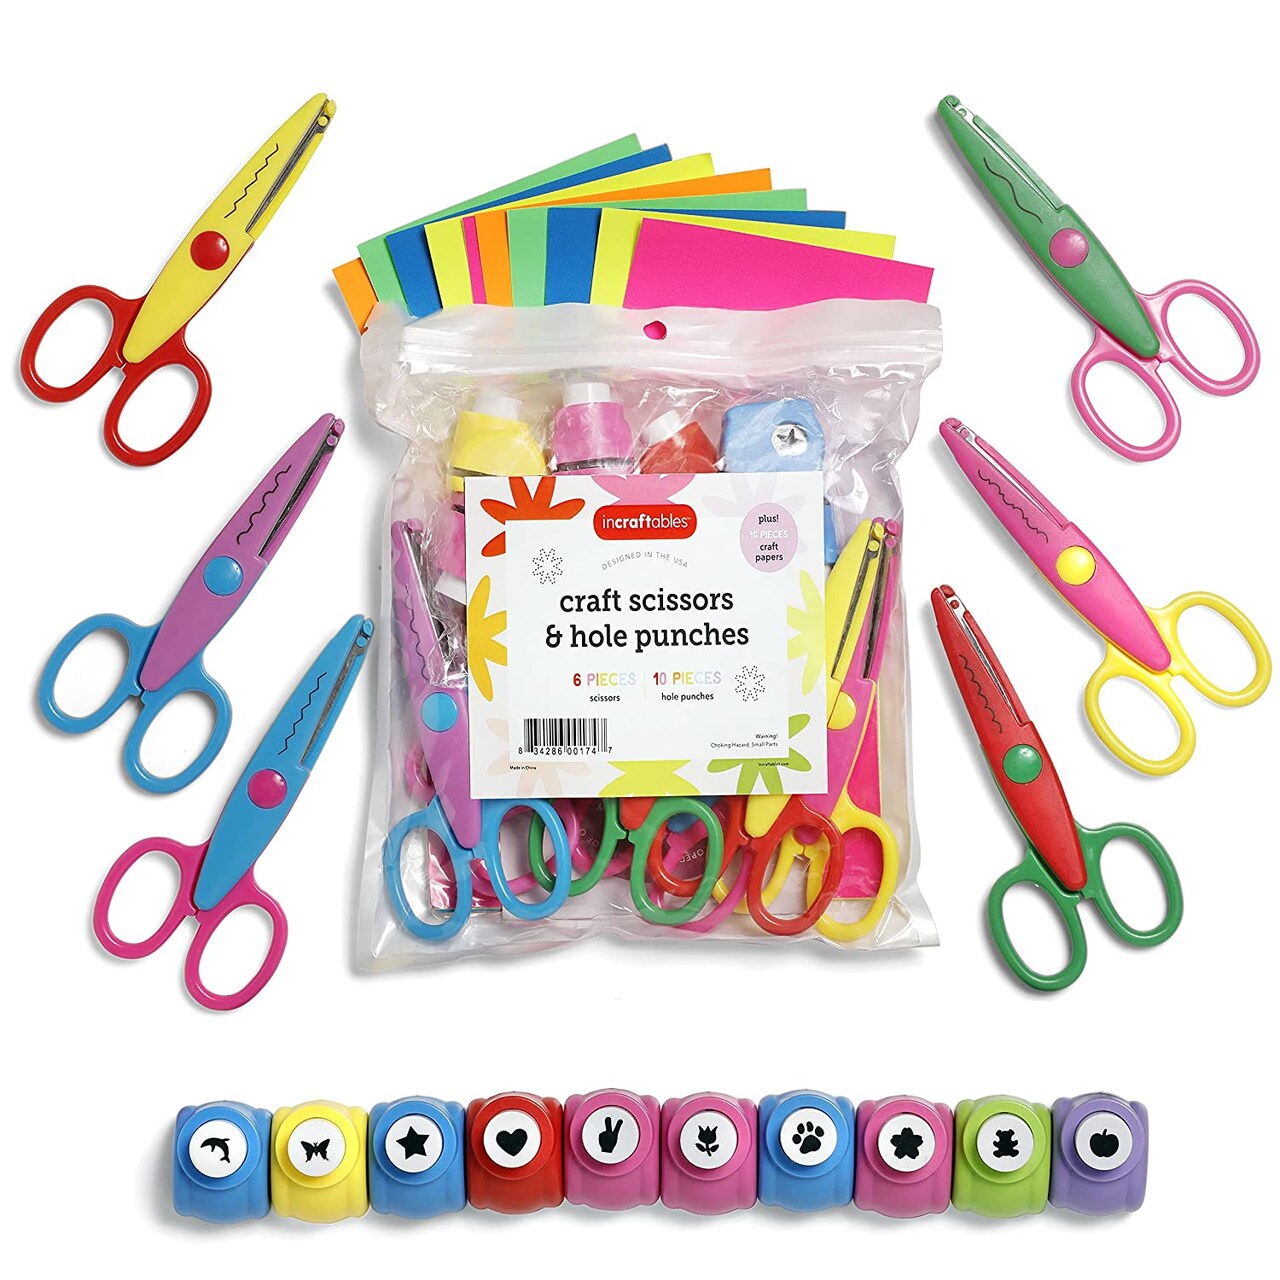 Incraftables 6pcs Decorative Pattern Edge Craft Scissors with 10pcs Small Paper  Hole Punch Shapes & 10pcs Colorful Papers. Best for Fun DIY Scrapbooking &  Crafting Projects for Kids & Adults